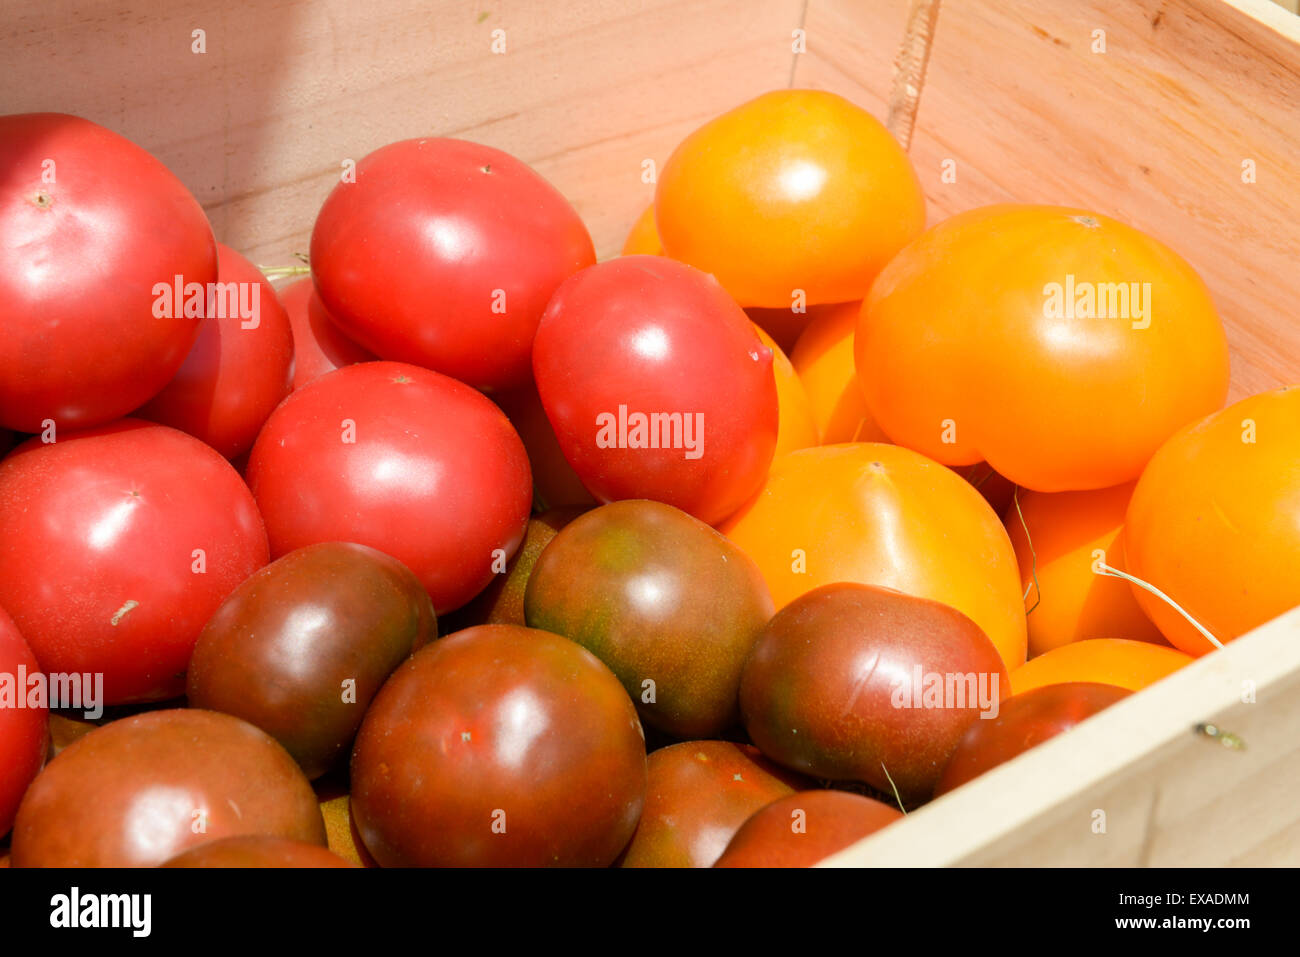 lot of red and yellow tomatoes in wooden crates Stock Photo